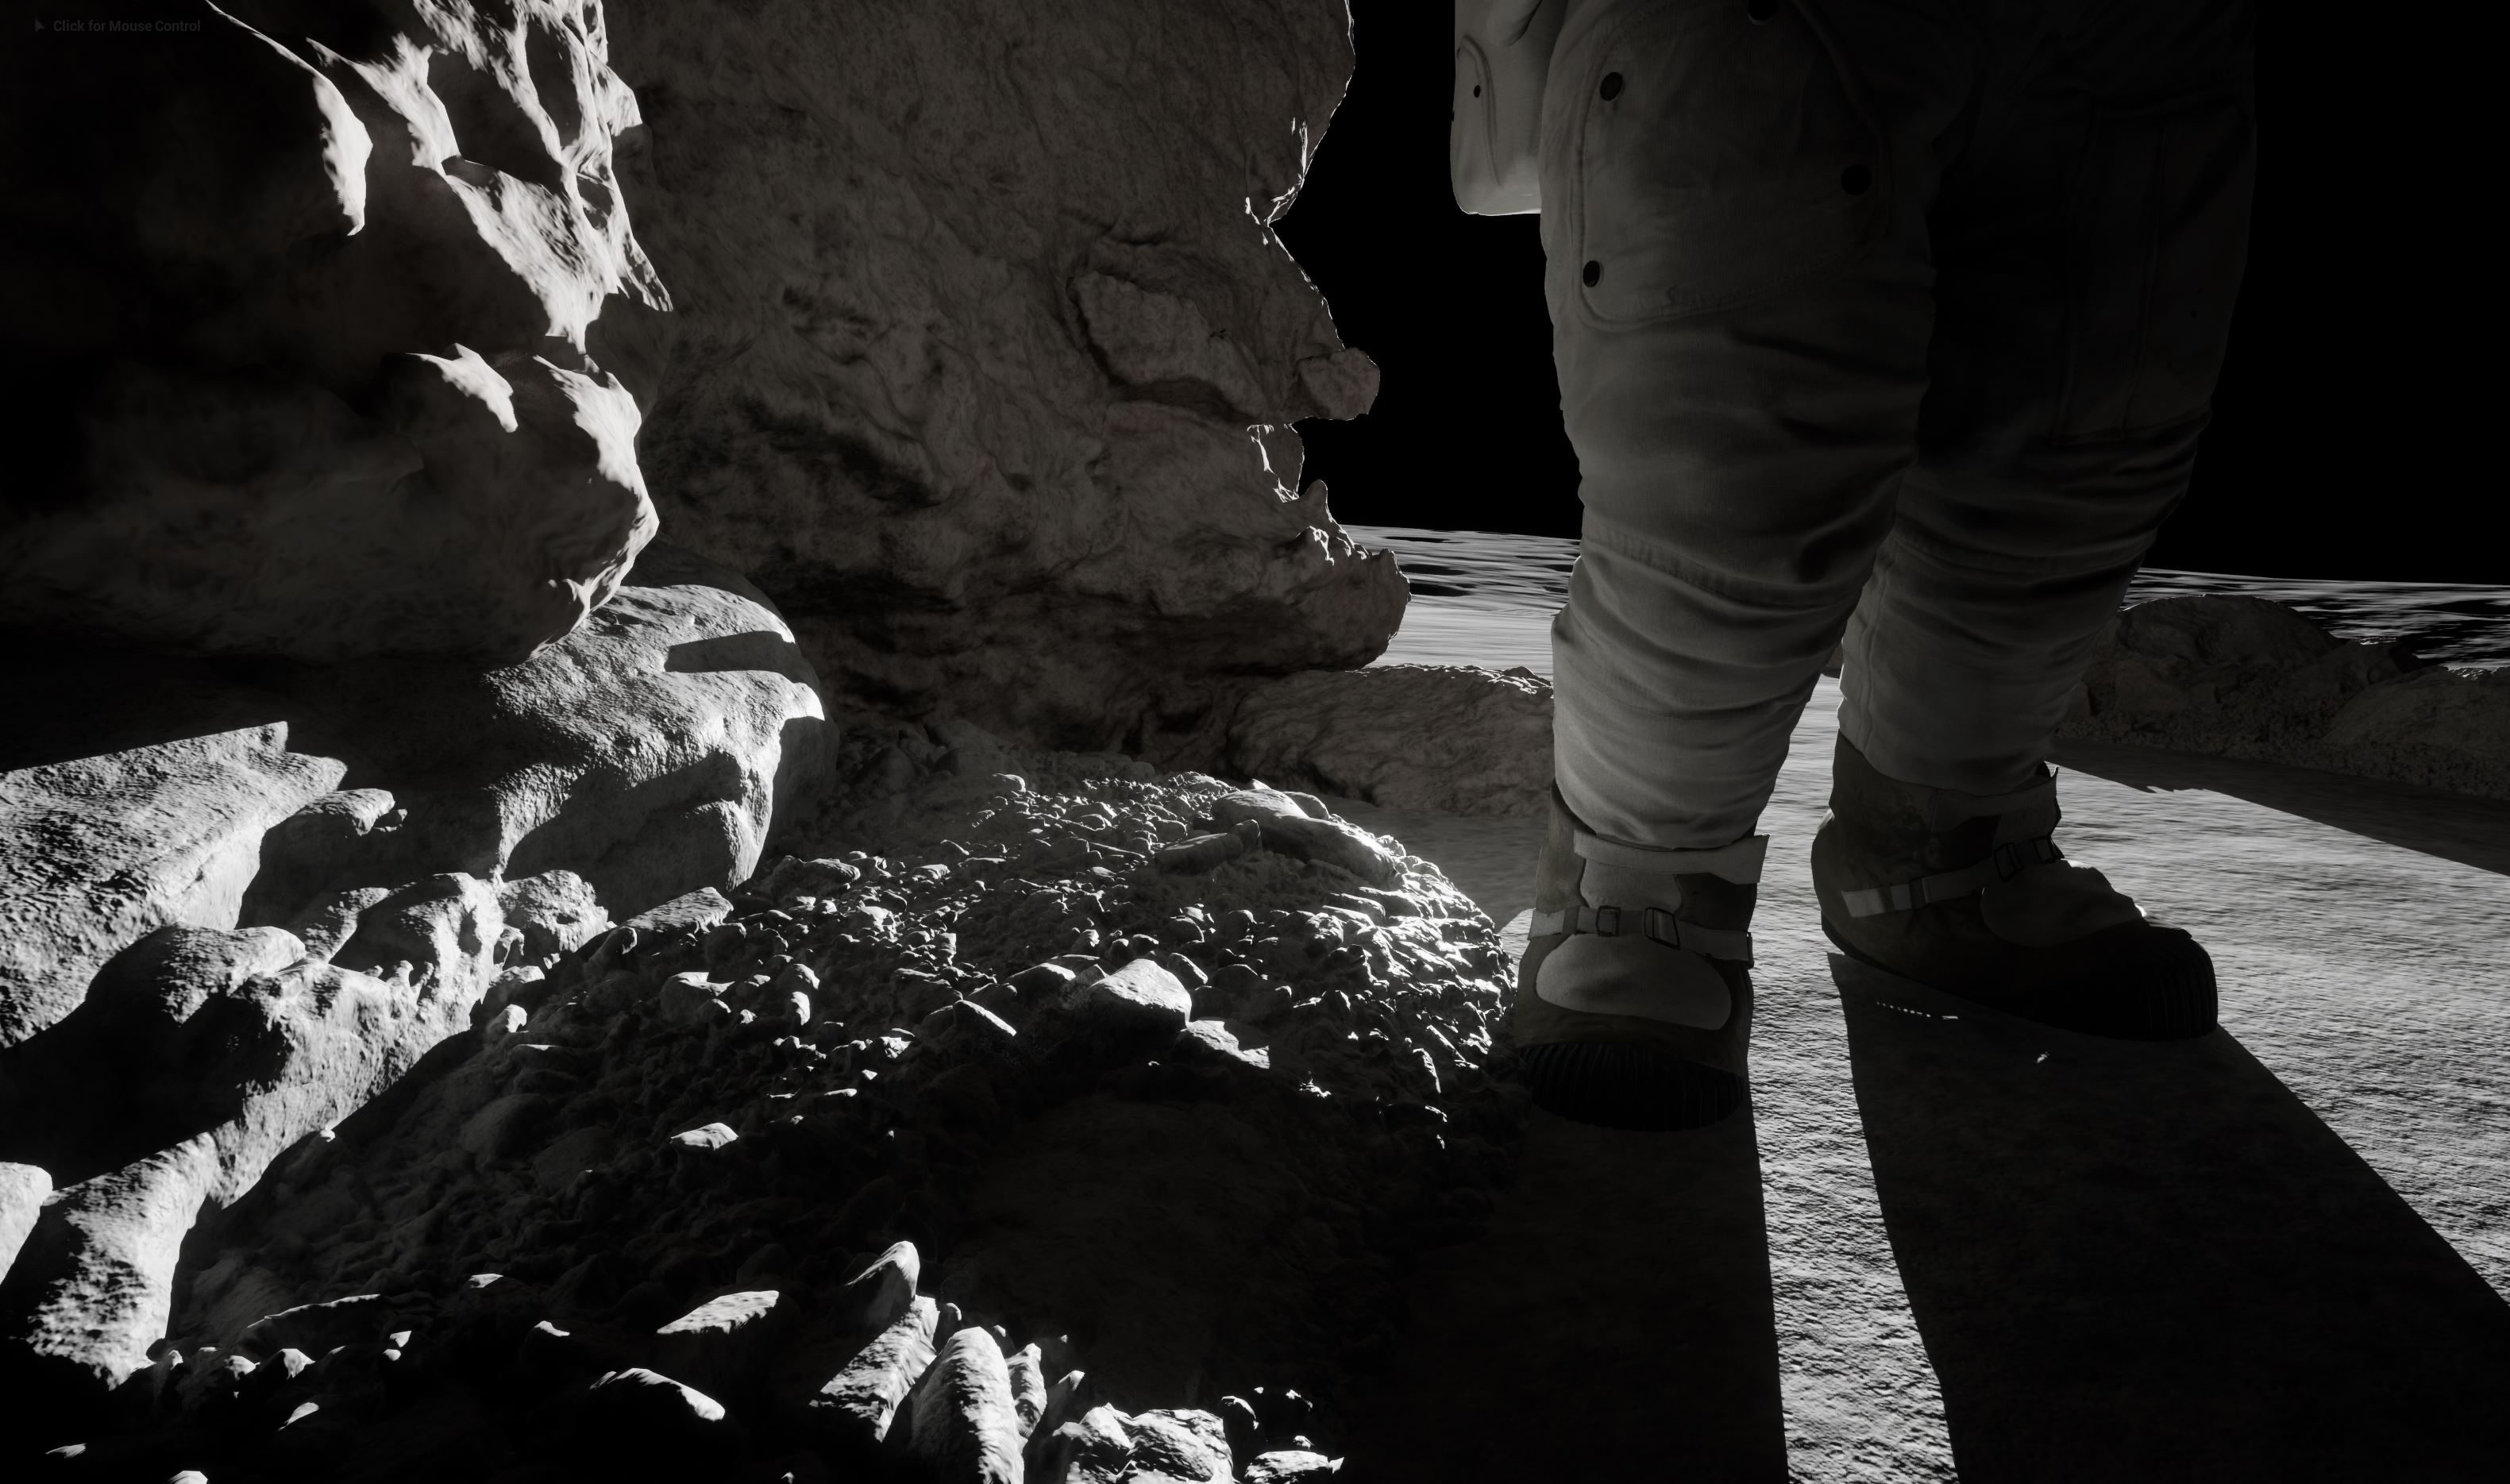 A VR simulation showing an astronaut on the moon